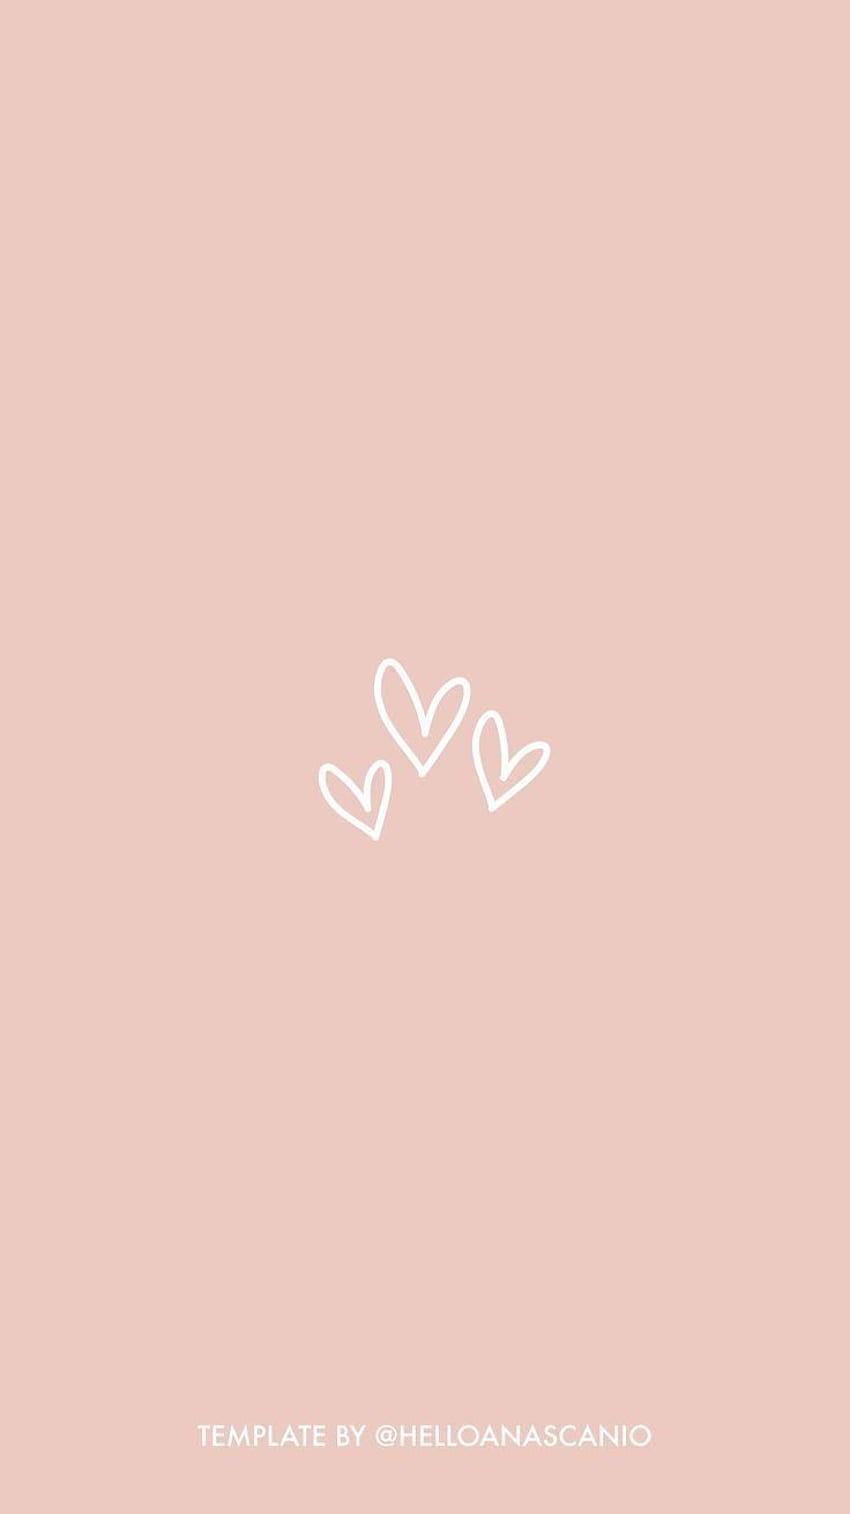 Amazing 300+ Instagram background pink For Your Desktop and Mobile